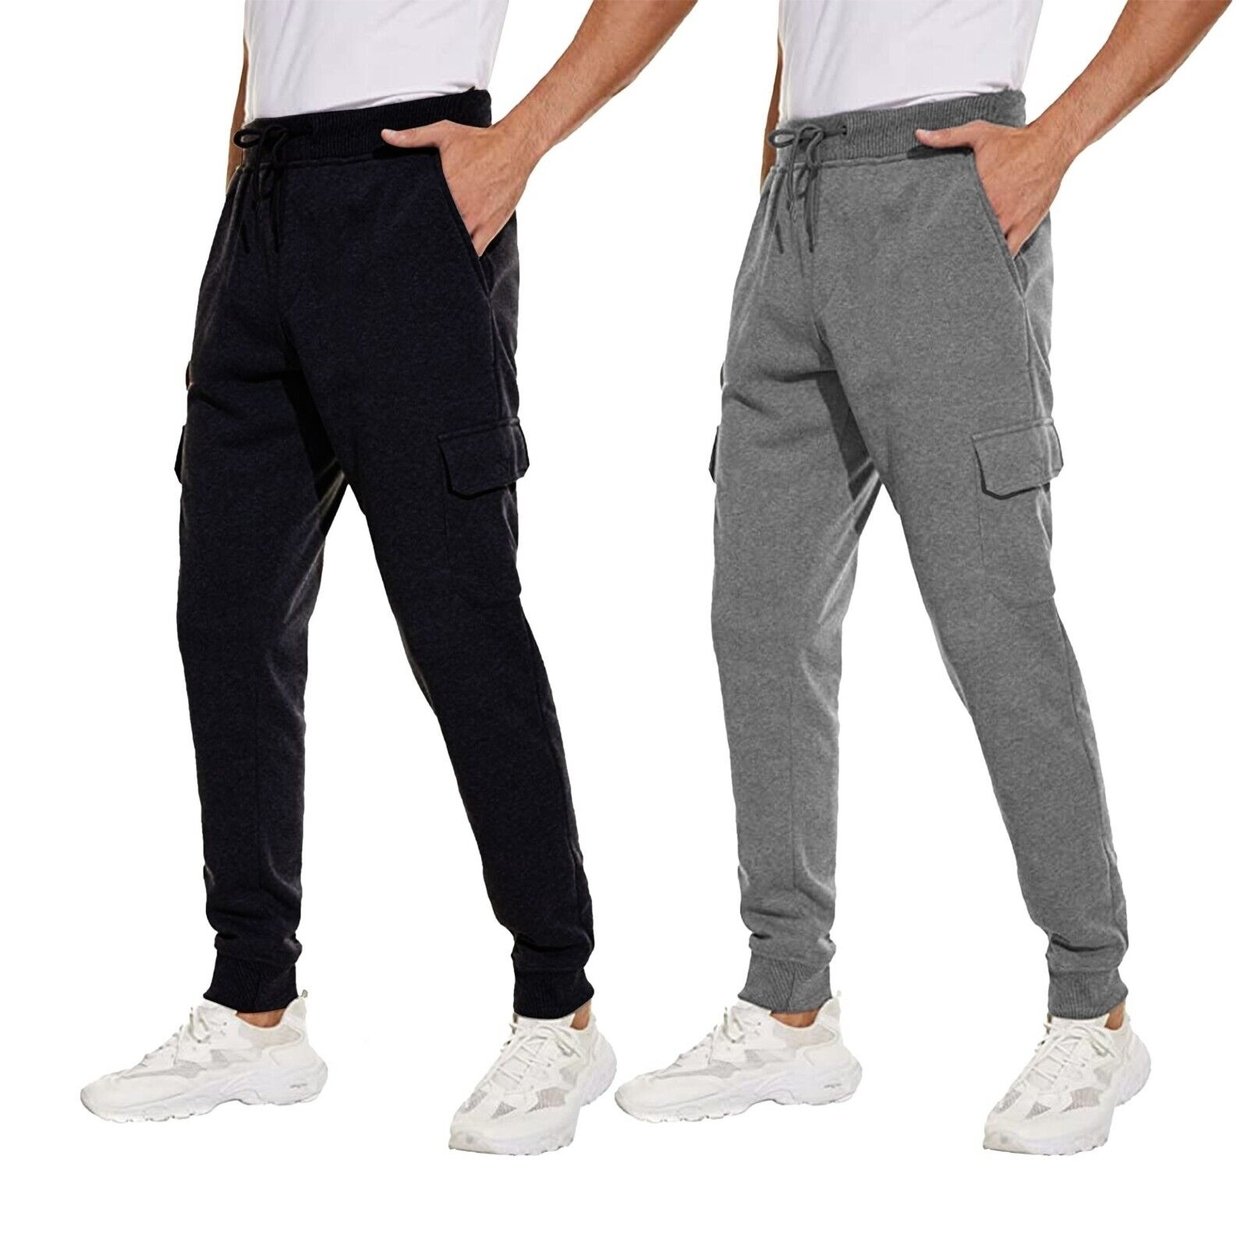 2-Pack Men's Ultra Soft Winter Warm Thick Athletic Sherpa Lined Jogger Pants - Black&grey, X-large